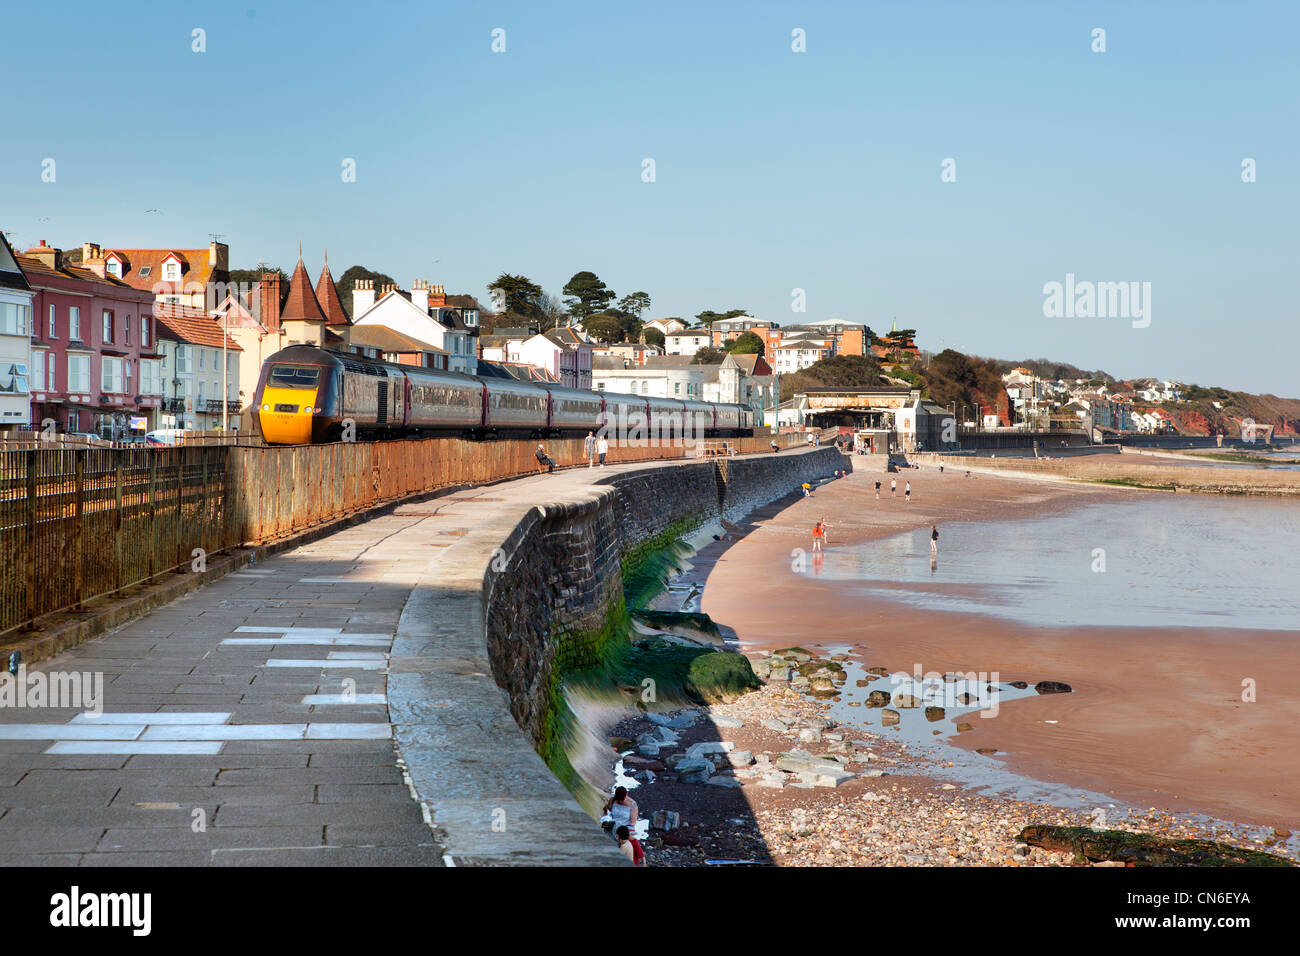 The town of Dawlish, In Devon, England. Stock Photo